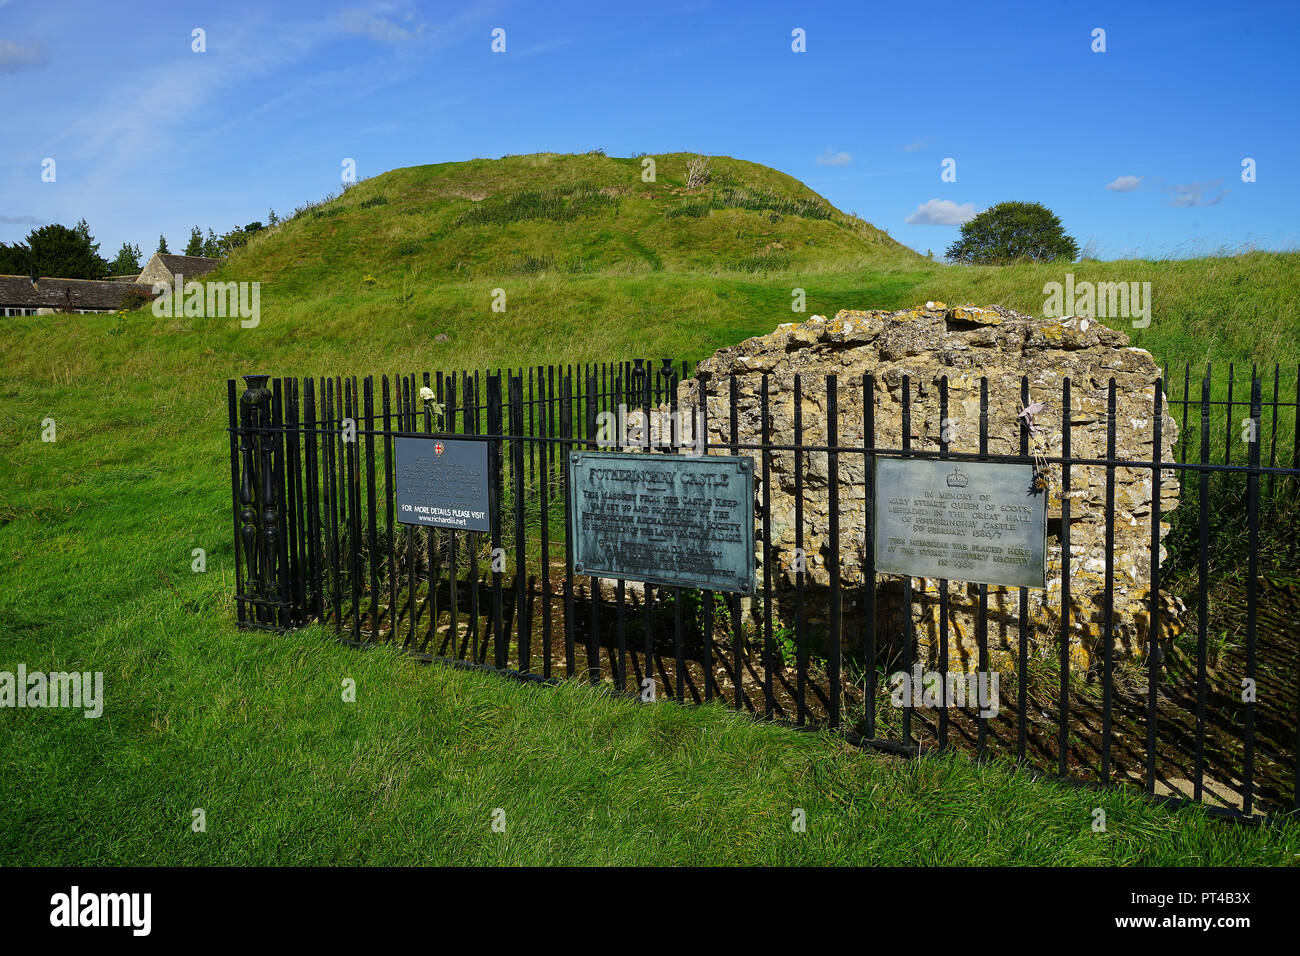 Plaques commemorating the birth of King Richard III and the execution of Mary Queen of Scots at Fotheringhay Castle Stock Photo